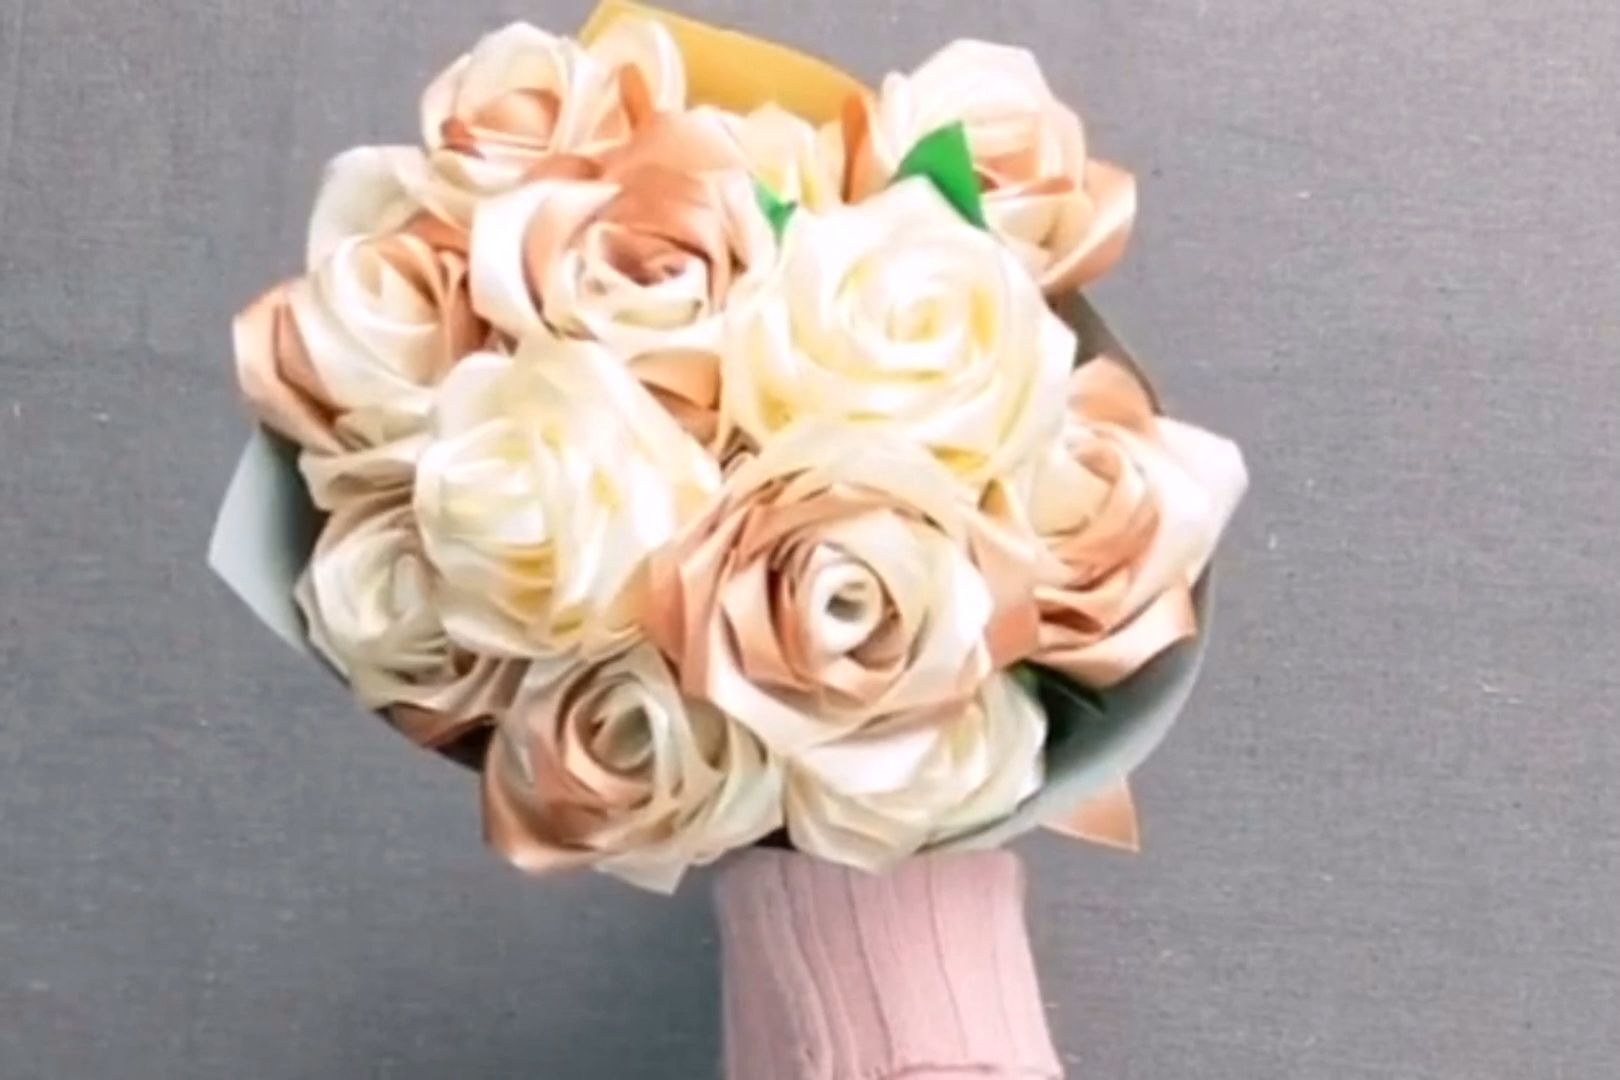 How to make ribbon roses flowers -   20 diy projects Videos kitchen ideas